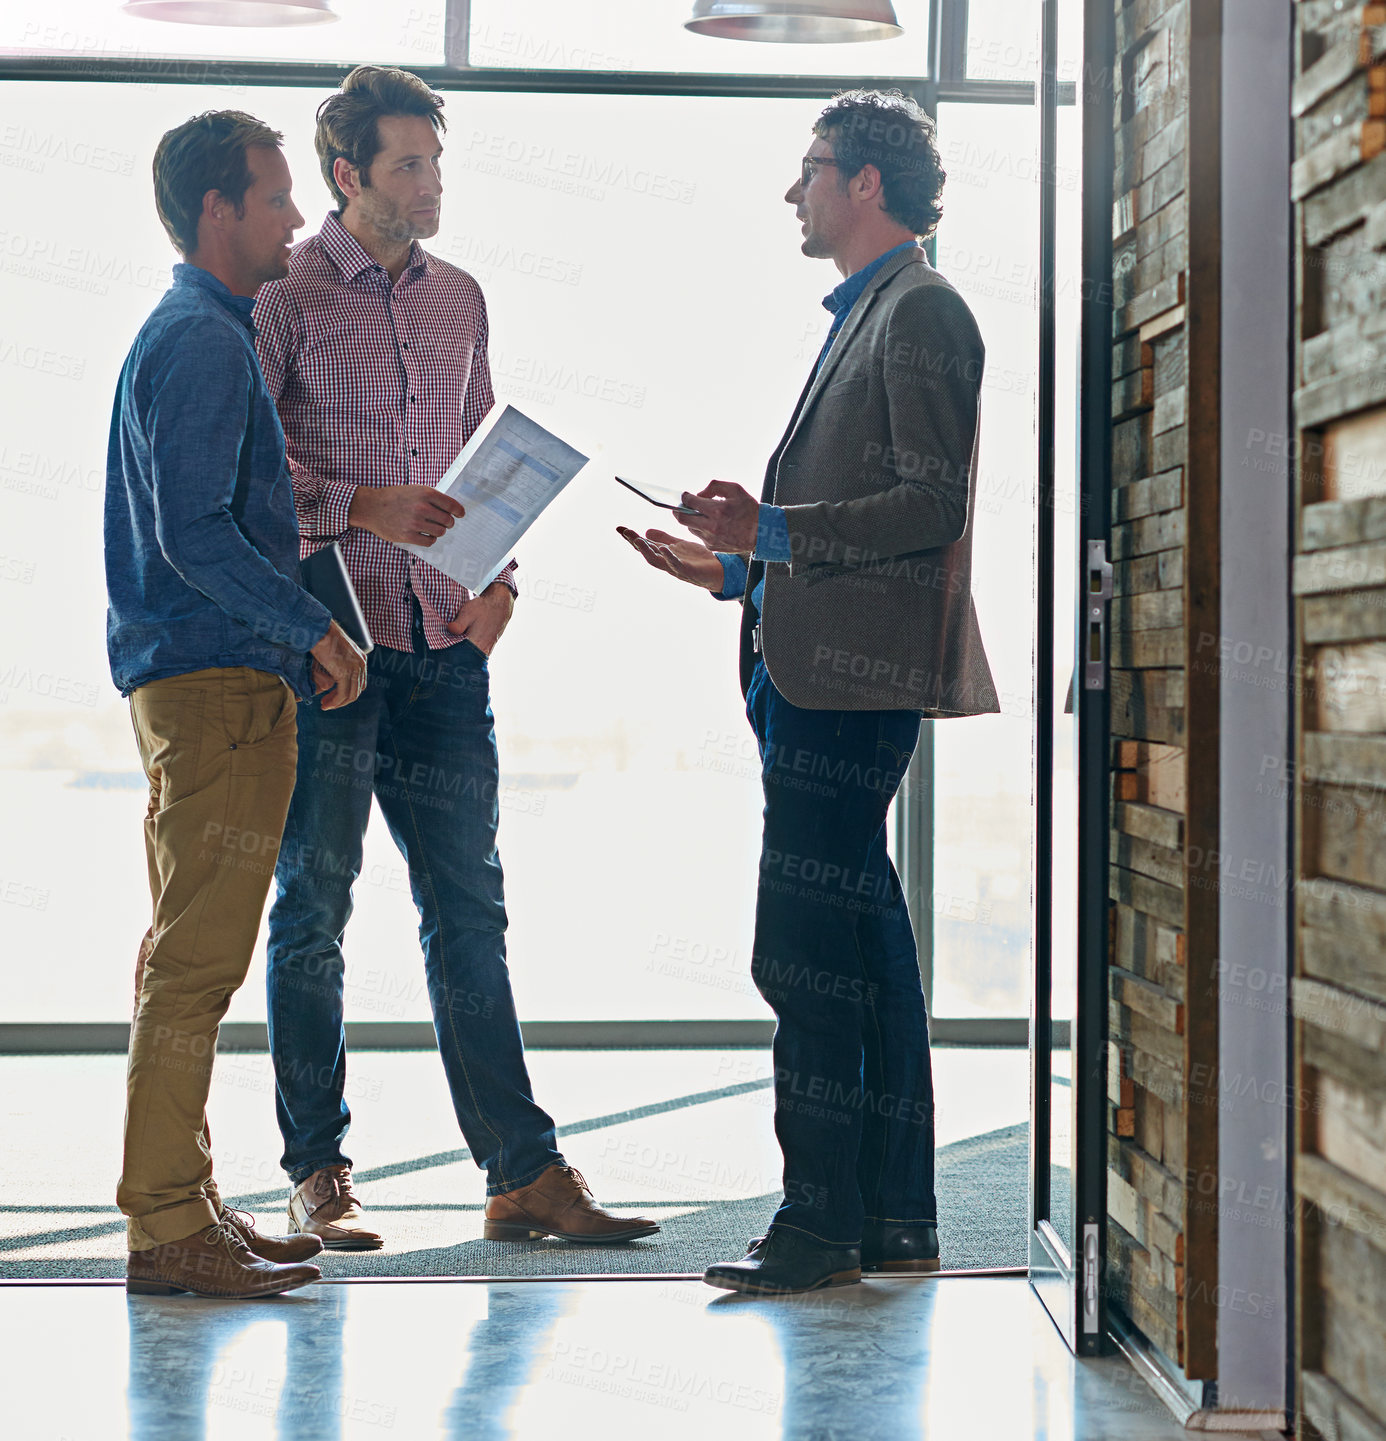 Buy stock photo Shot of male coworkers talking while standing in front of a window in an office